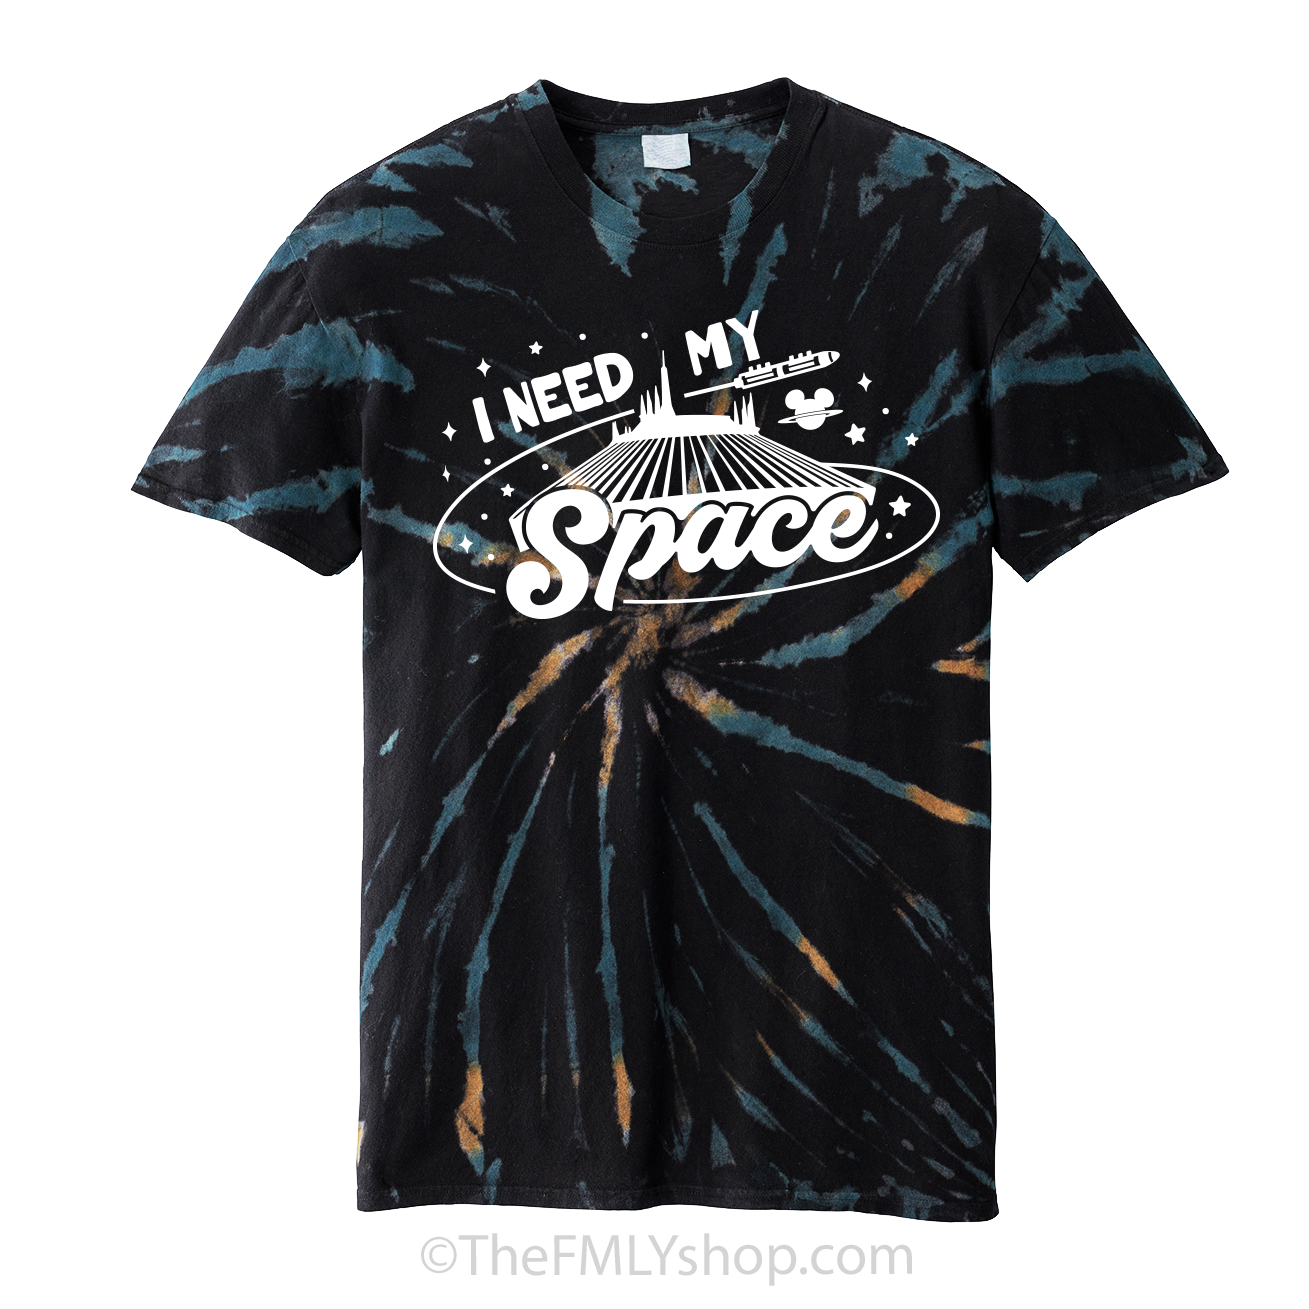 I Need My Space, Galaxy Tie Dye Tee, Space Mountain Tee– THE FMLY SHOP